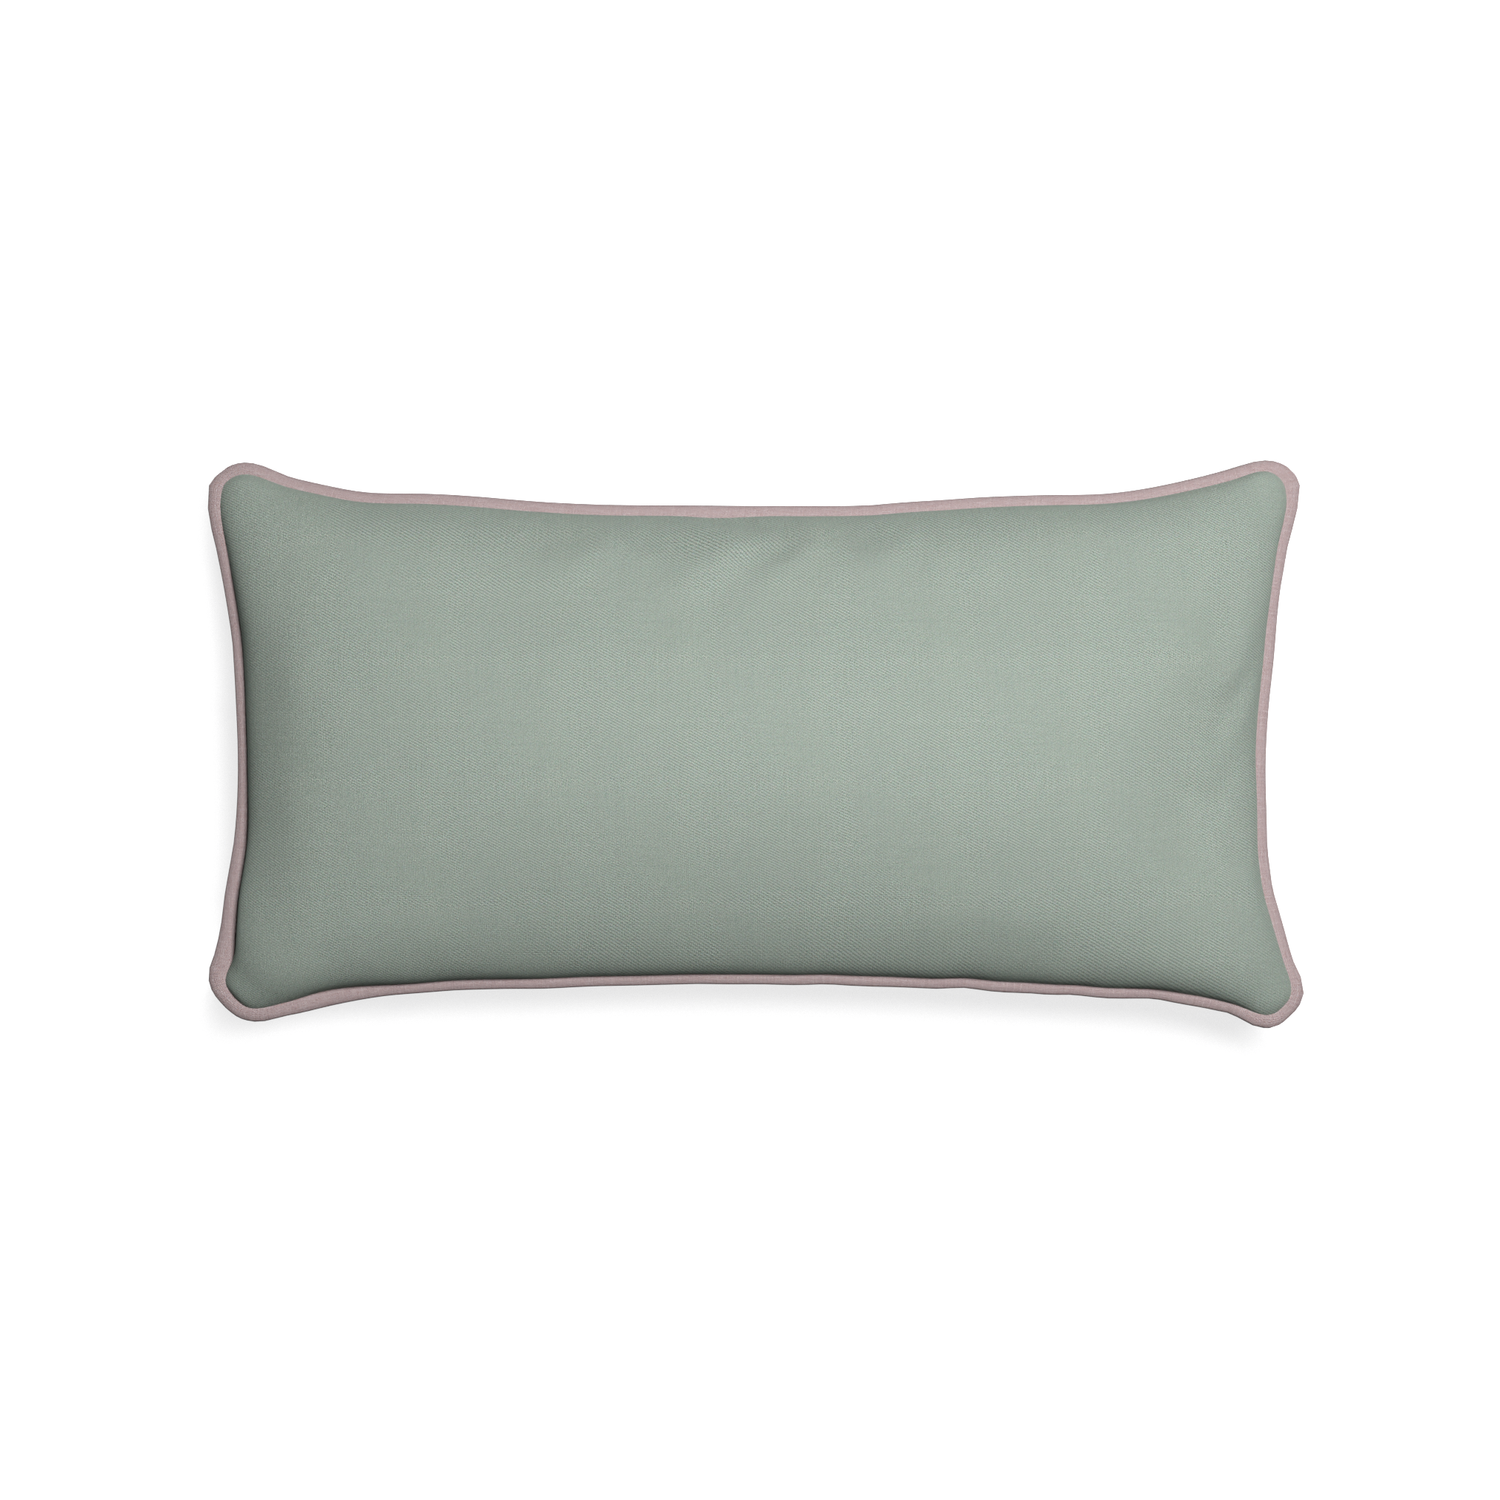 Midi-lumbar sage custom sage green cottonpillow with orchid piping on white background